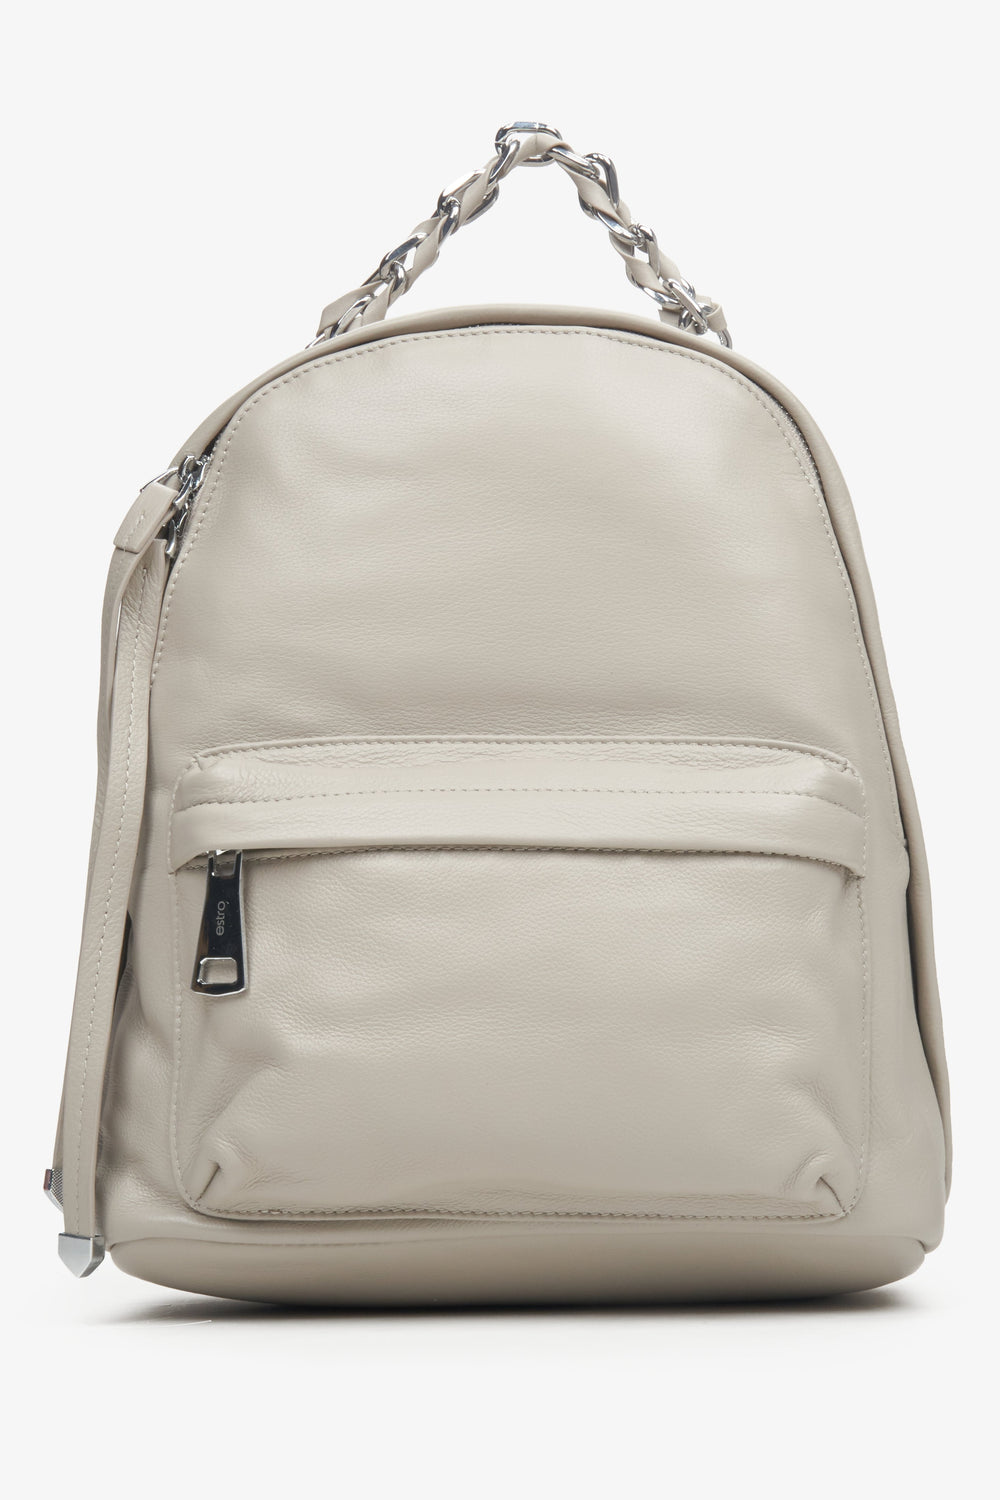 Women's Light Grey Backpack made of Genuine Leather with Silver Details Estro ER00113752.